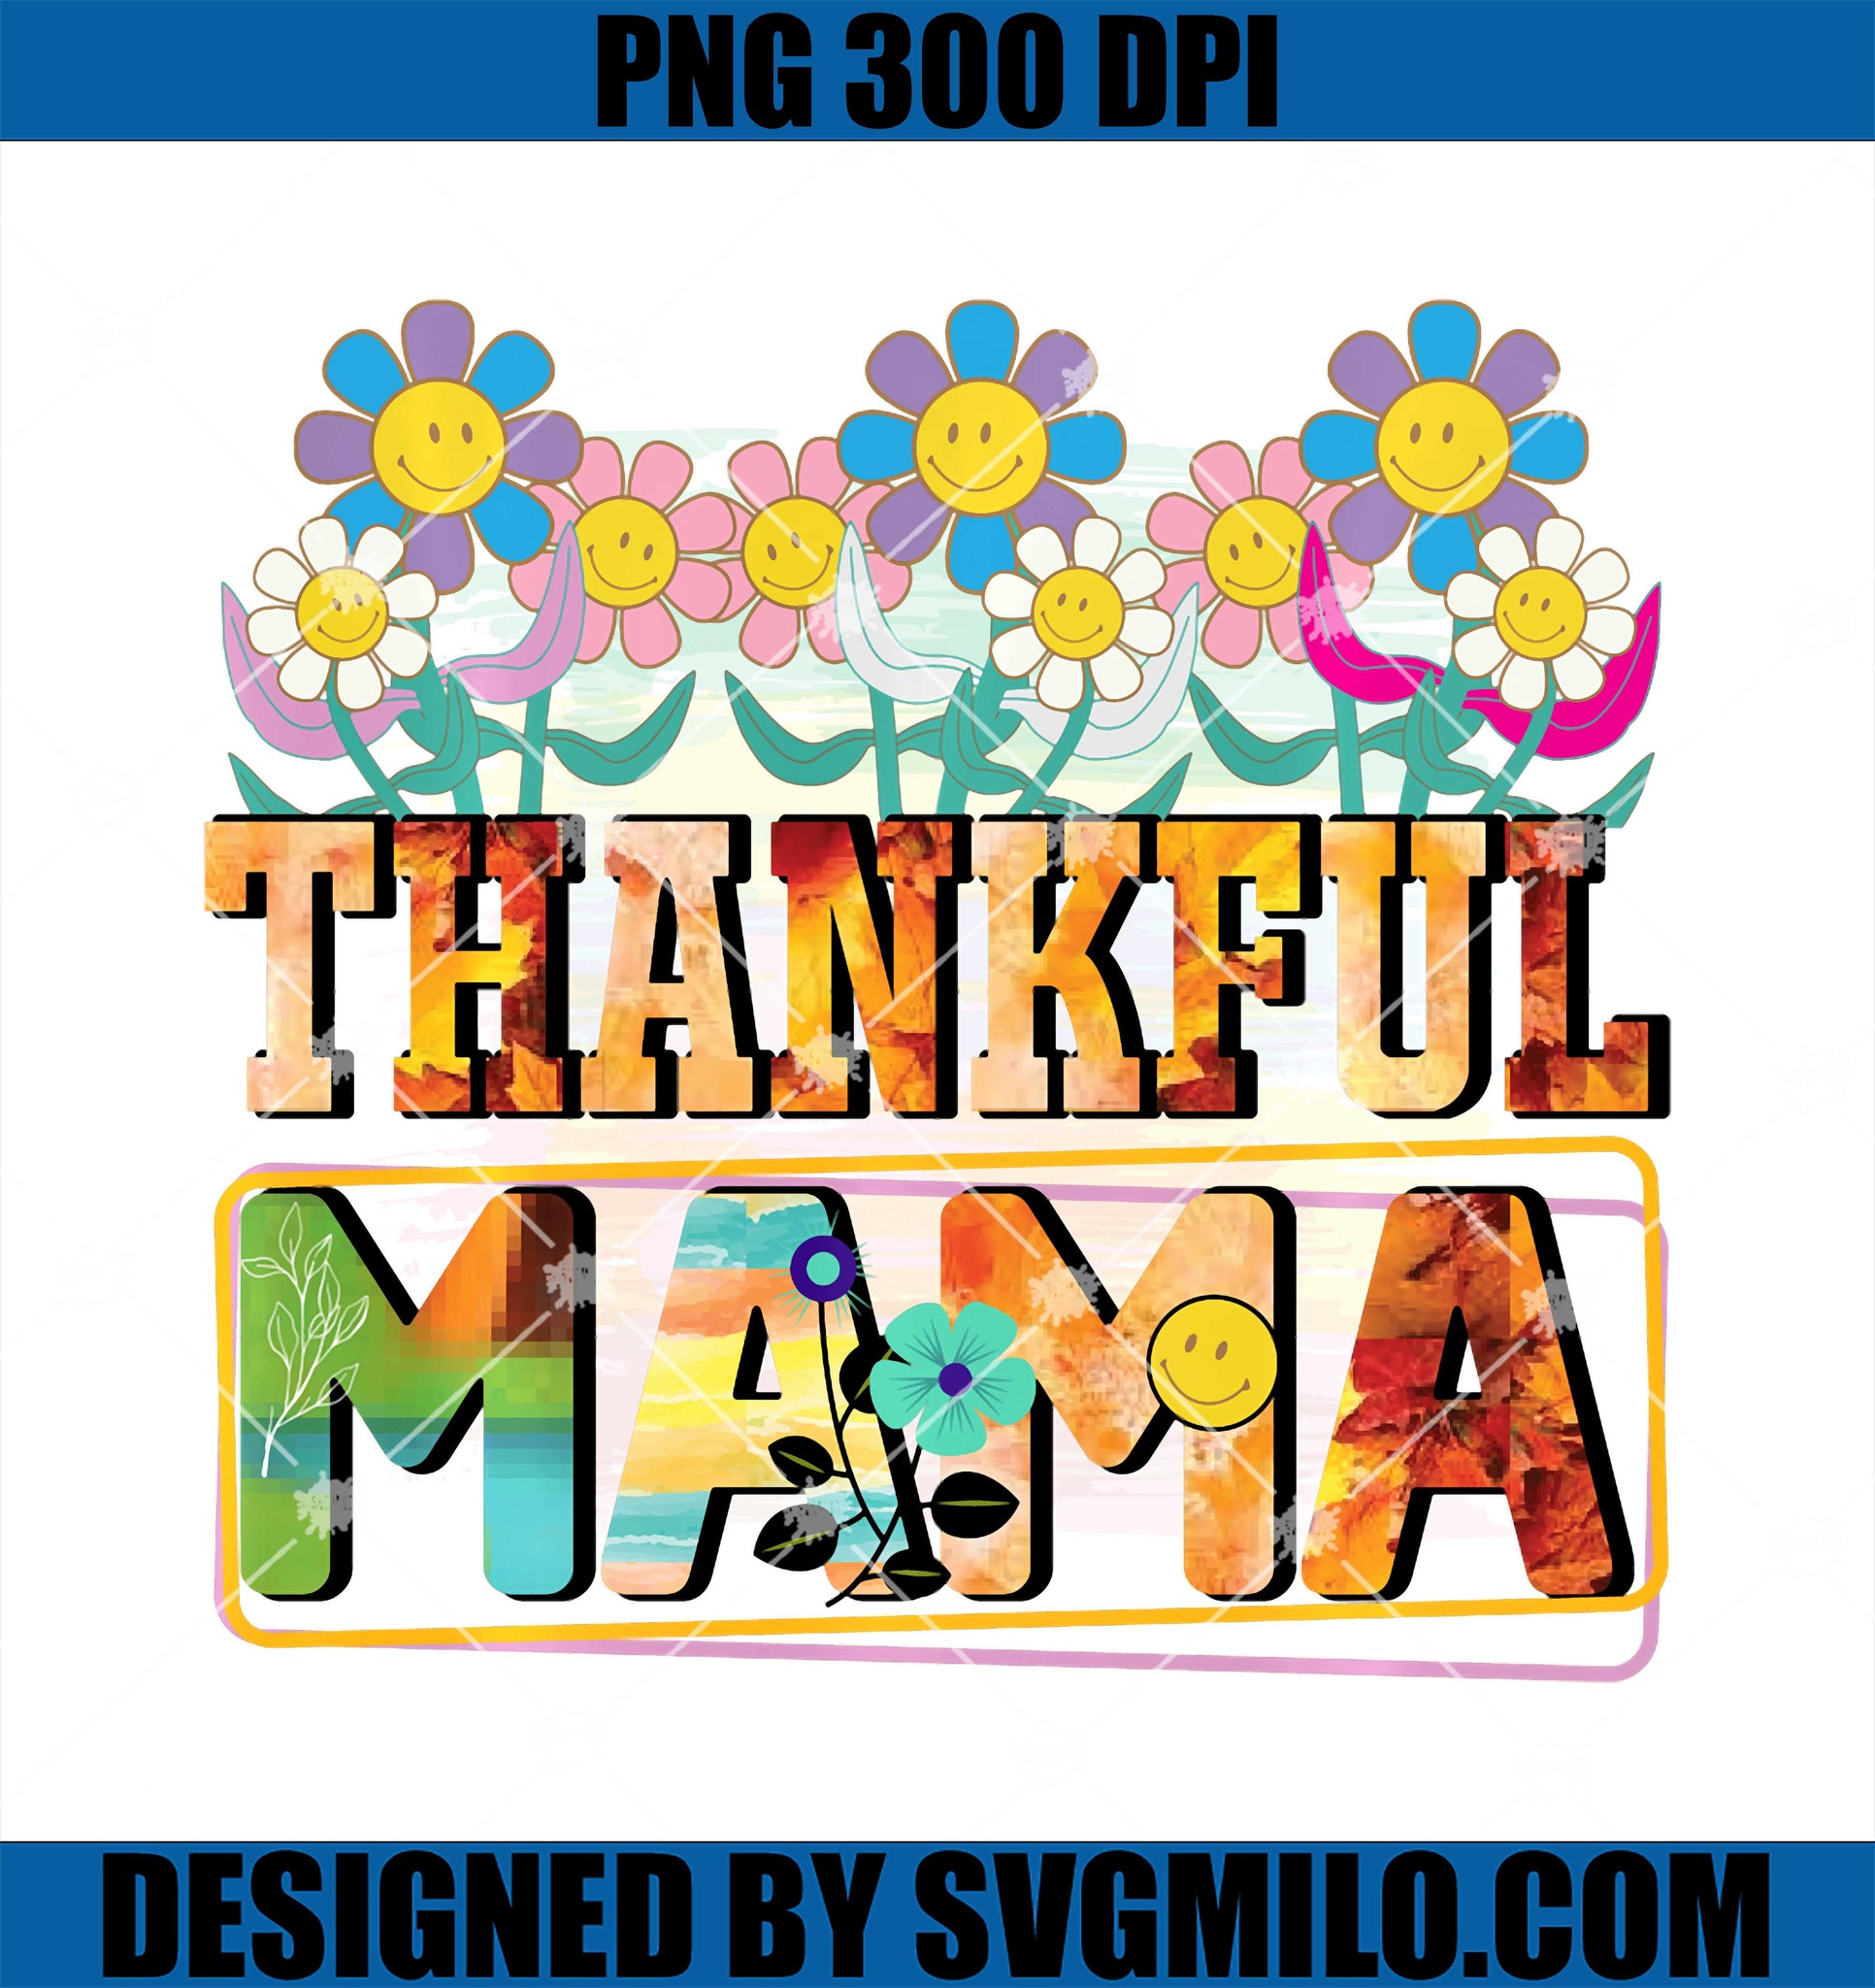 One Thankful Mama PNG, Thanksgiving Mother PNG